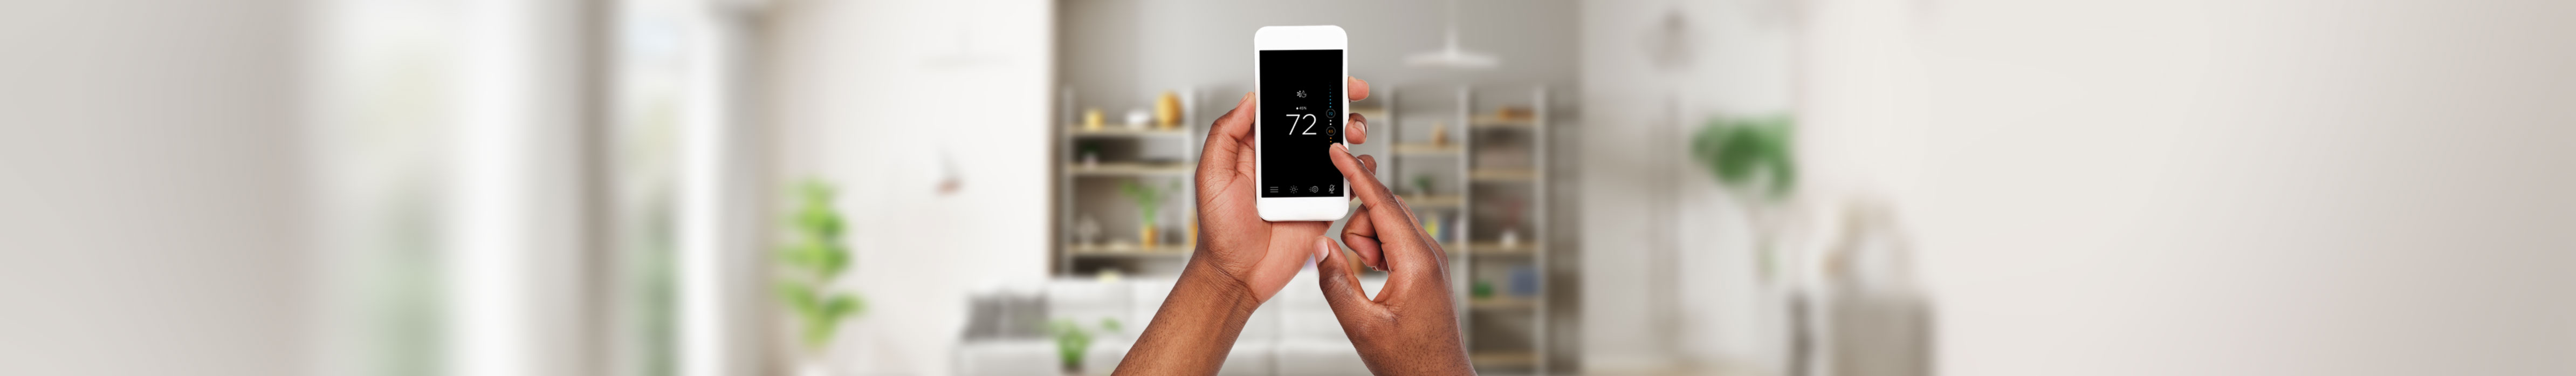 Smart-Device-Banner-Setting-thermostat-with-iphone